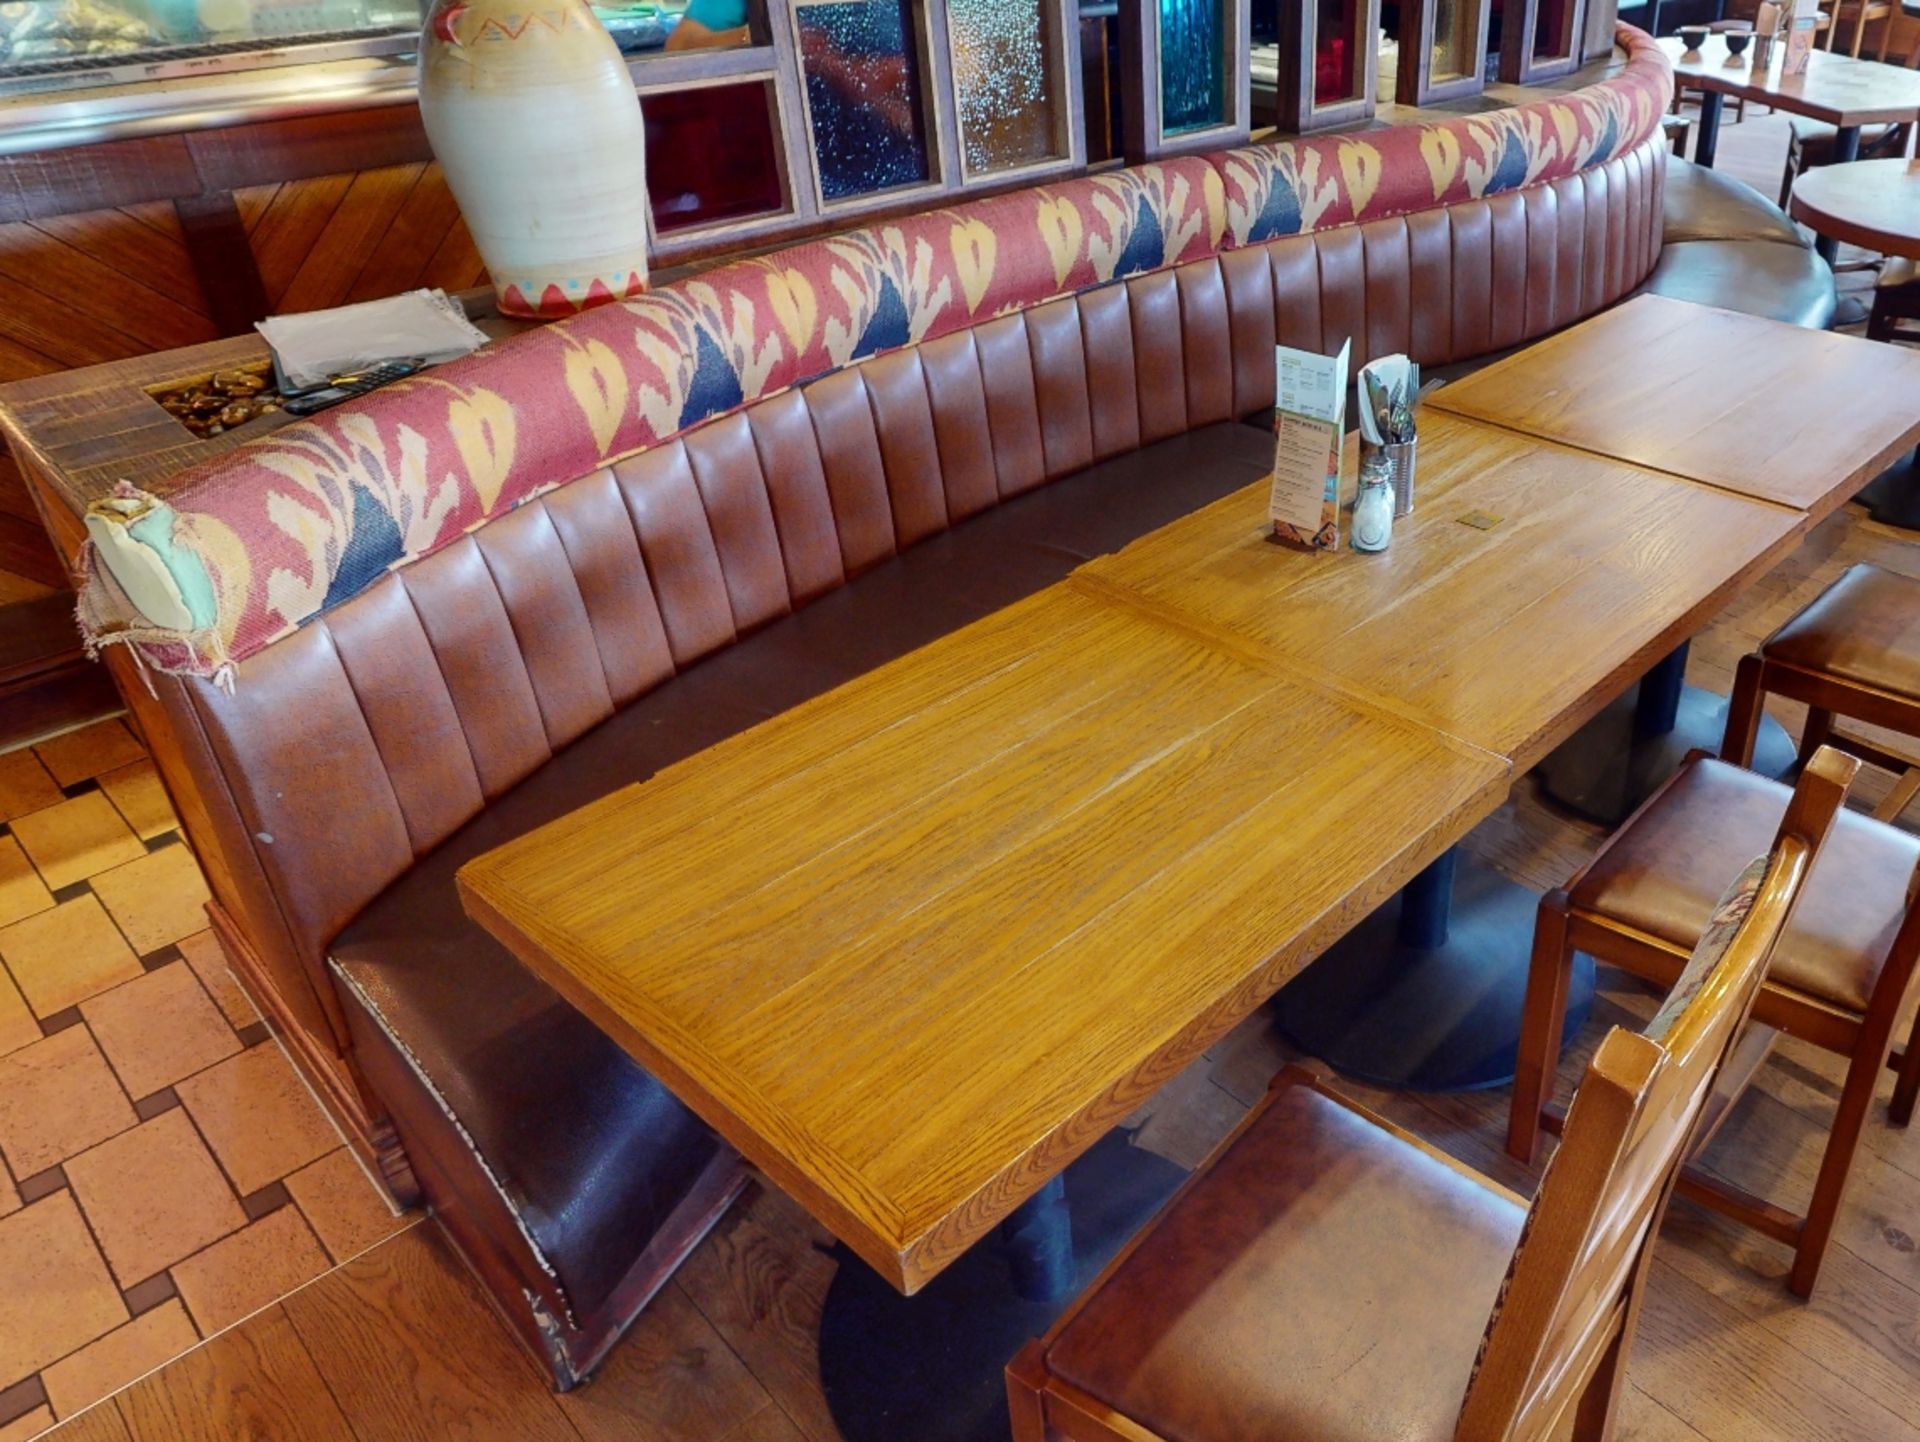 1 x Restaurant Curved Long Seating Bench - Features Brown Faux Leather Seat Pads and Light Brown - Image 6 of 7